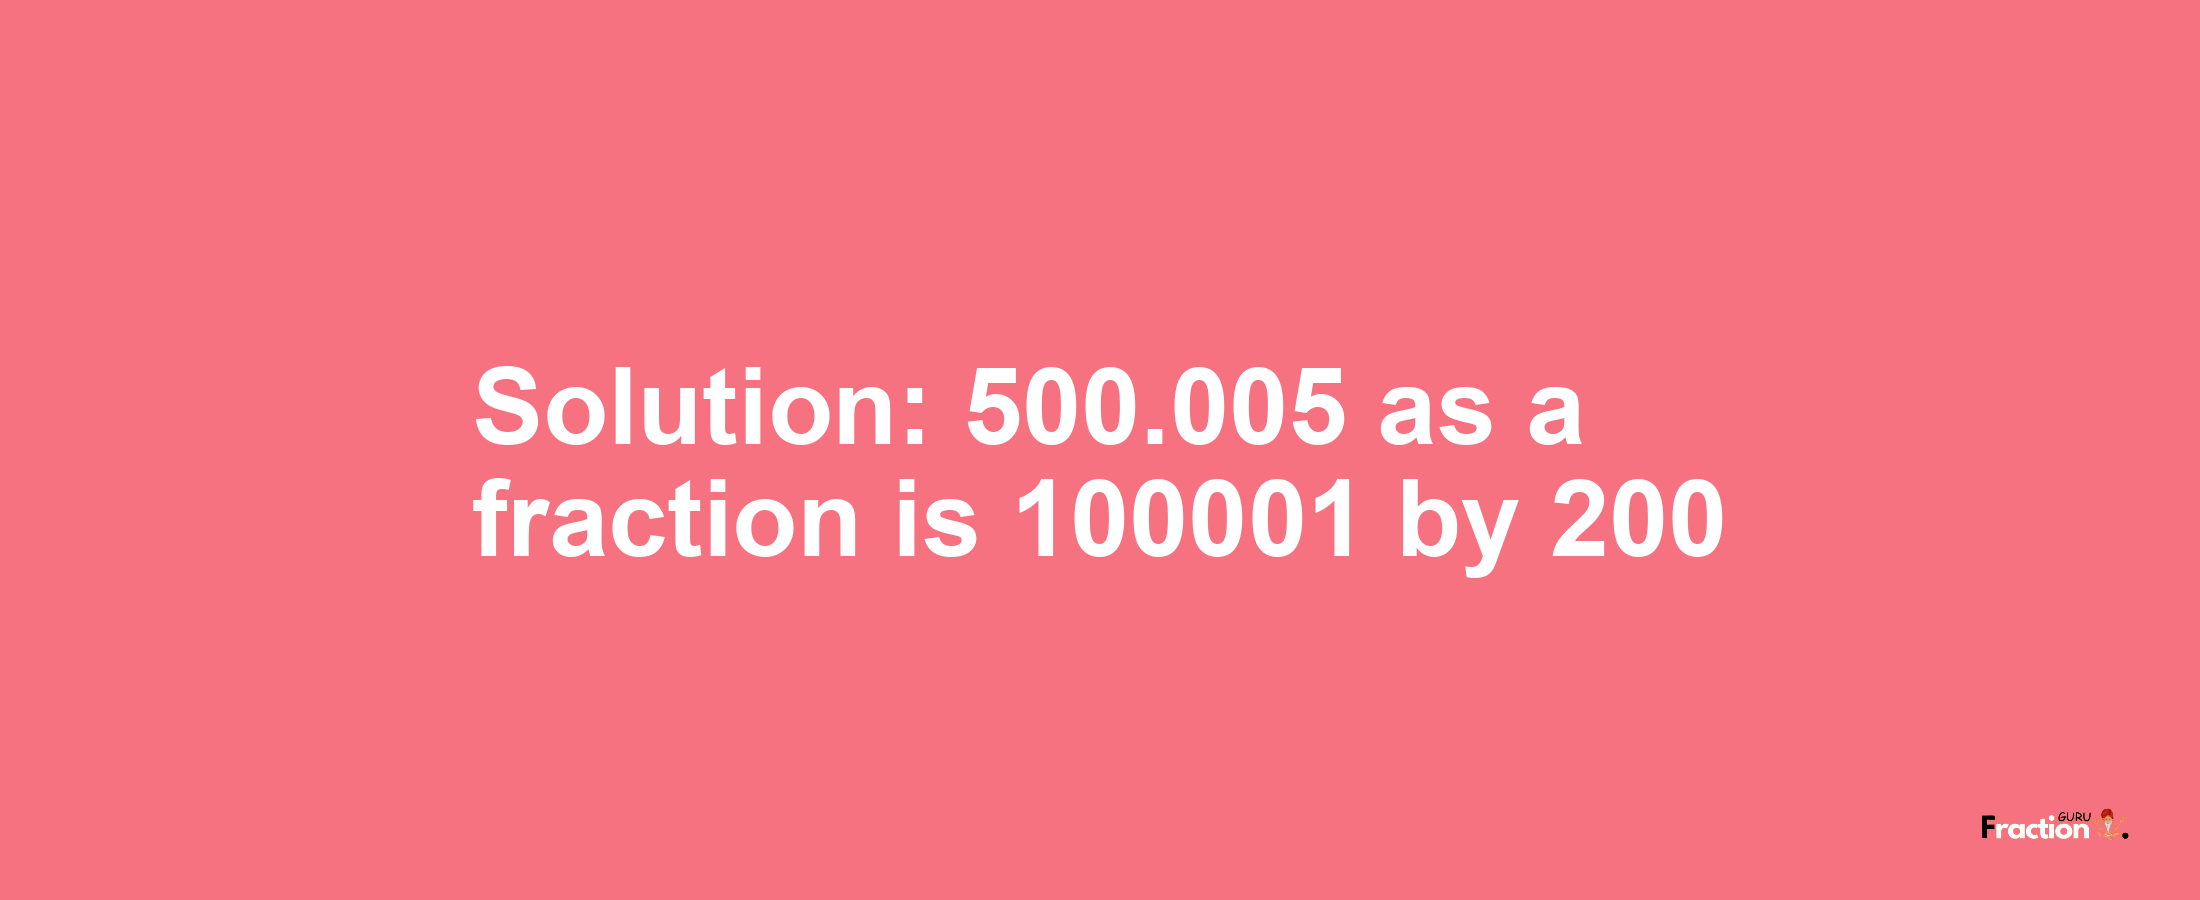 Solution:500.005 as a fraction is 100001/200